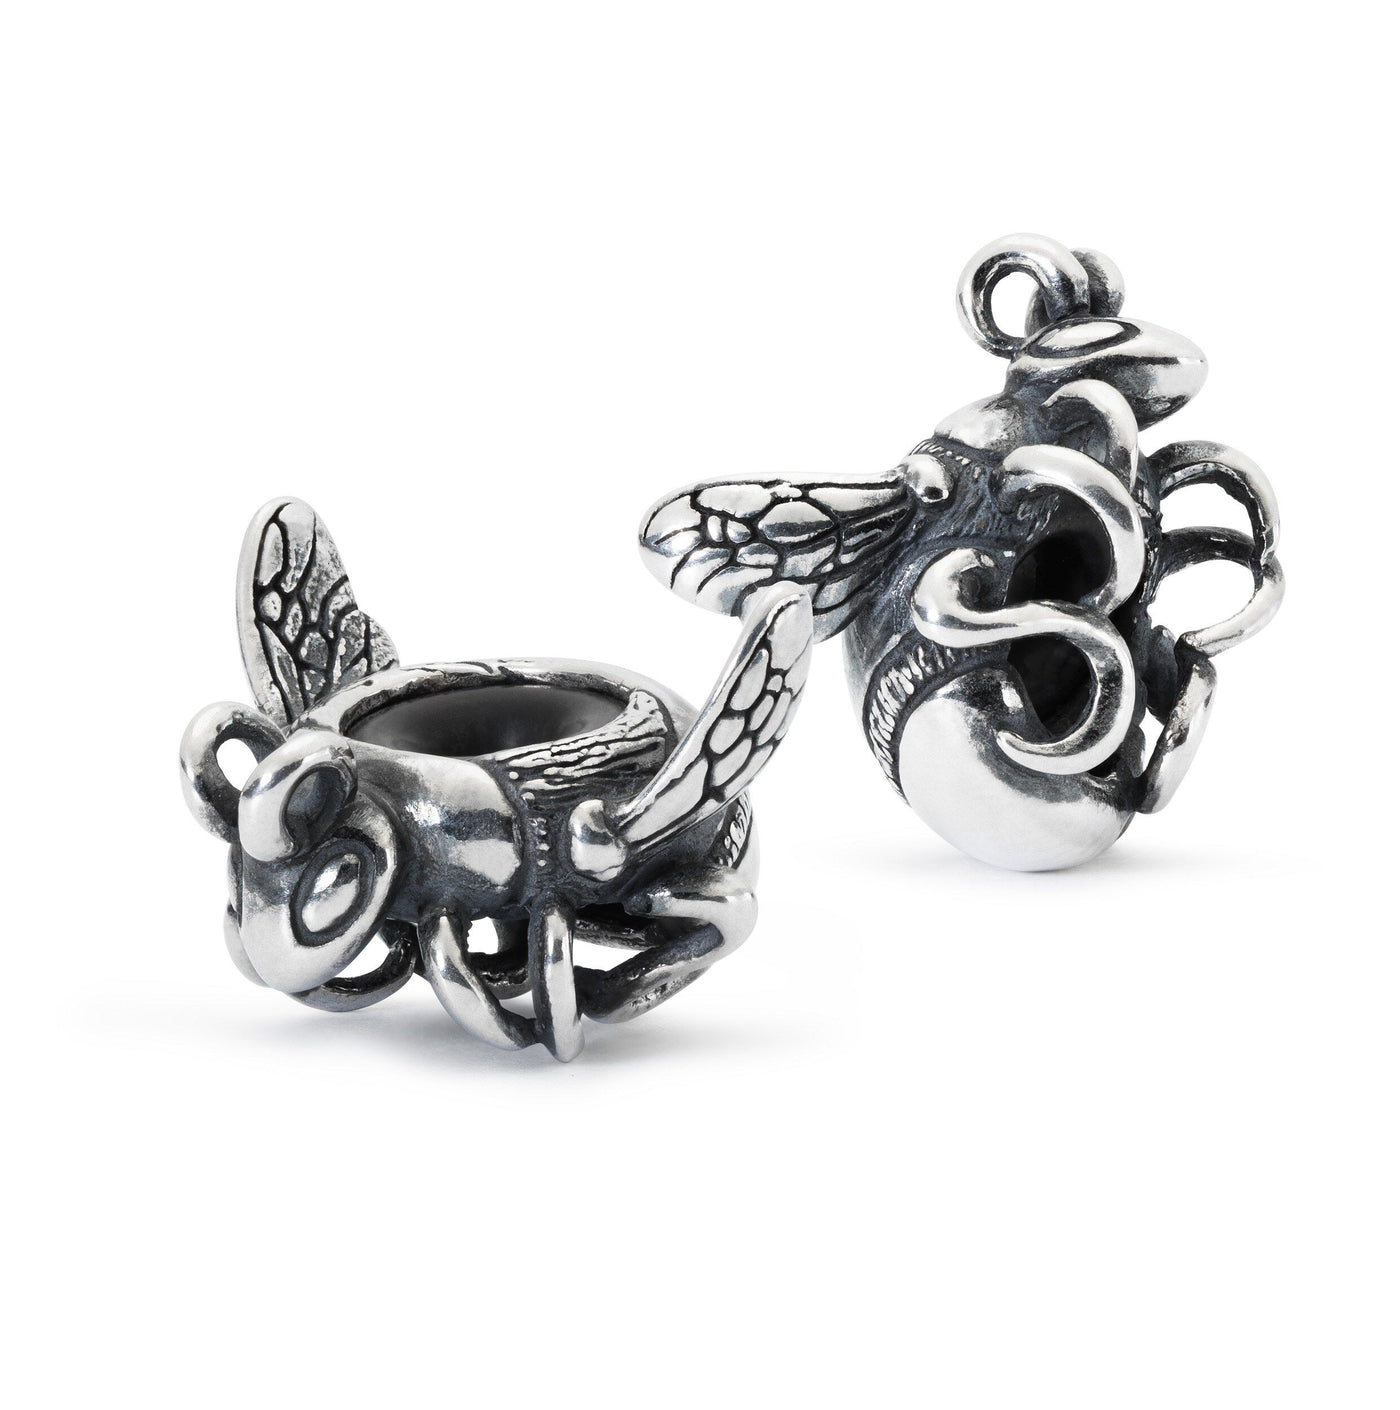 Bumble Bee Spacer (2 pcs) - Trollbeads Canada